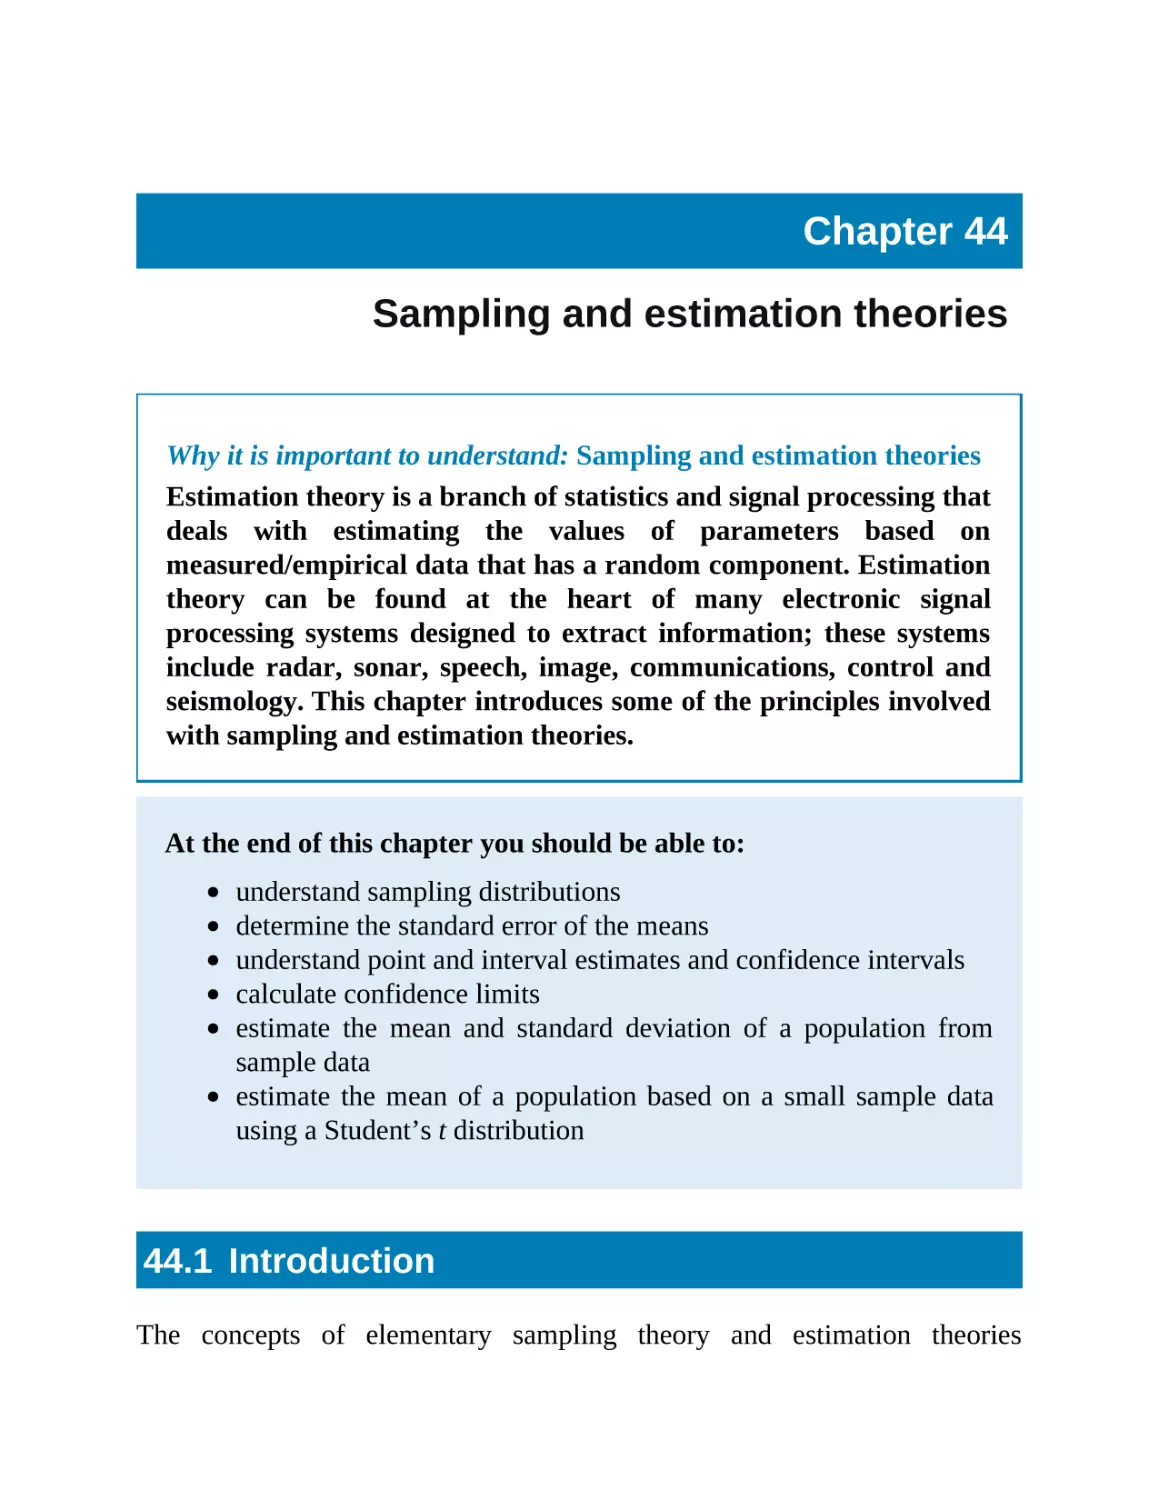 44 Sampling and estimation theories
44.1 Introduction